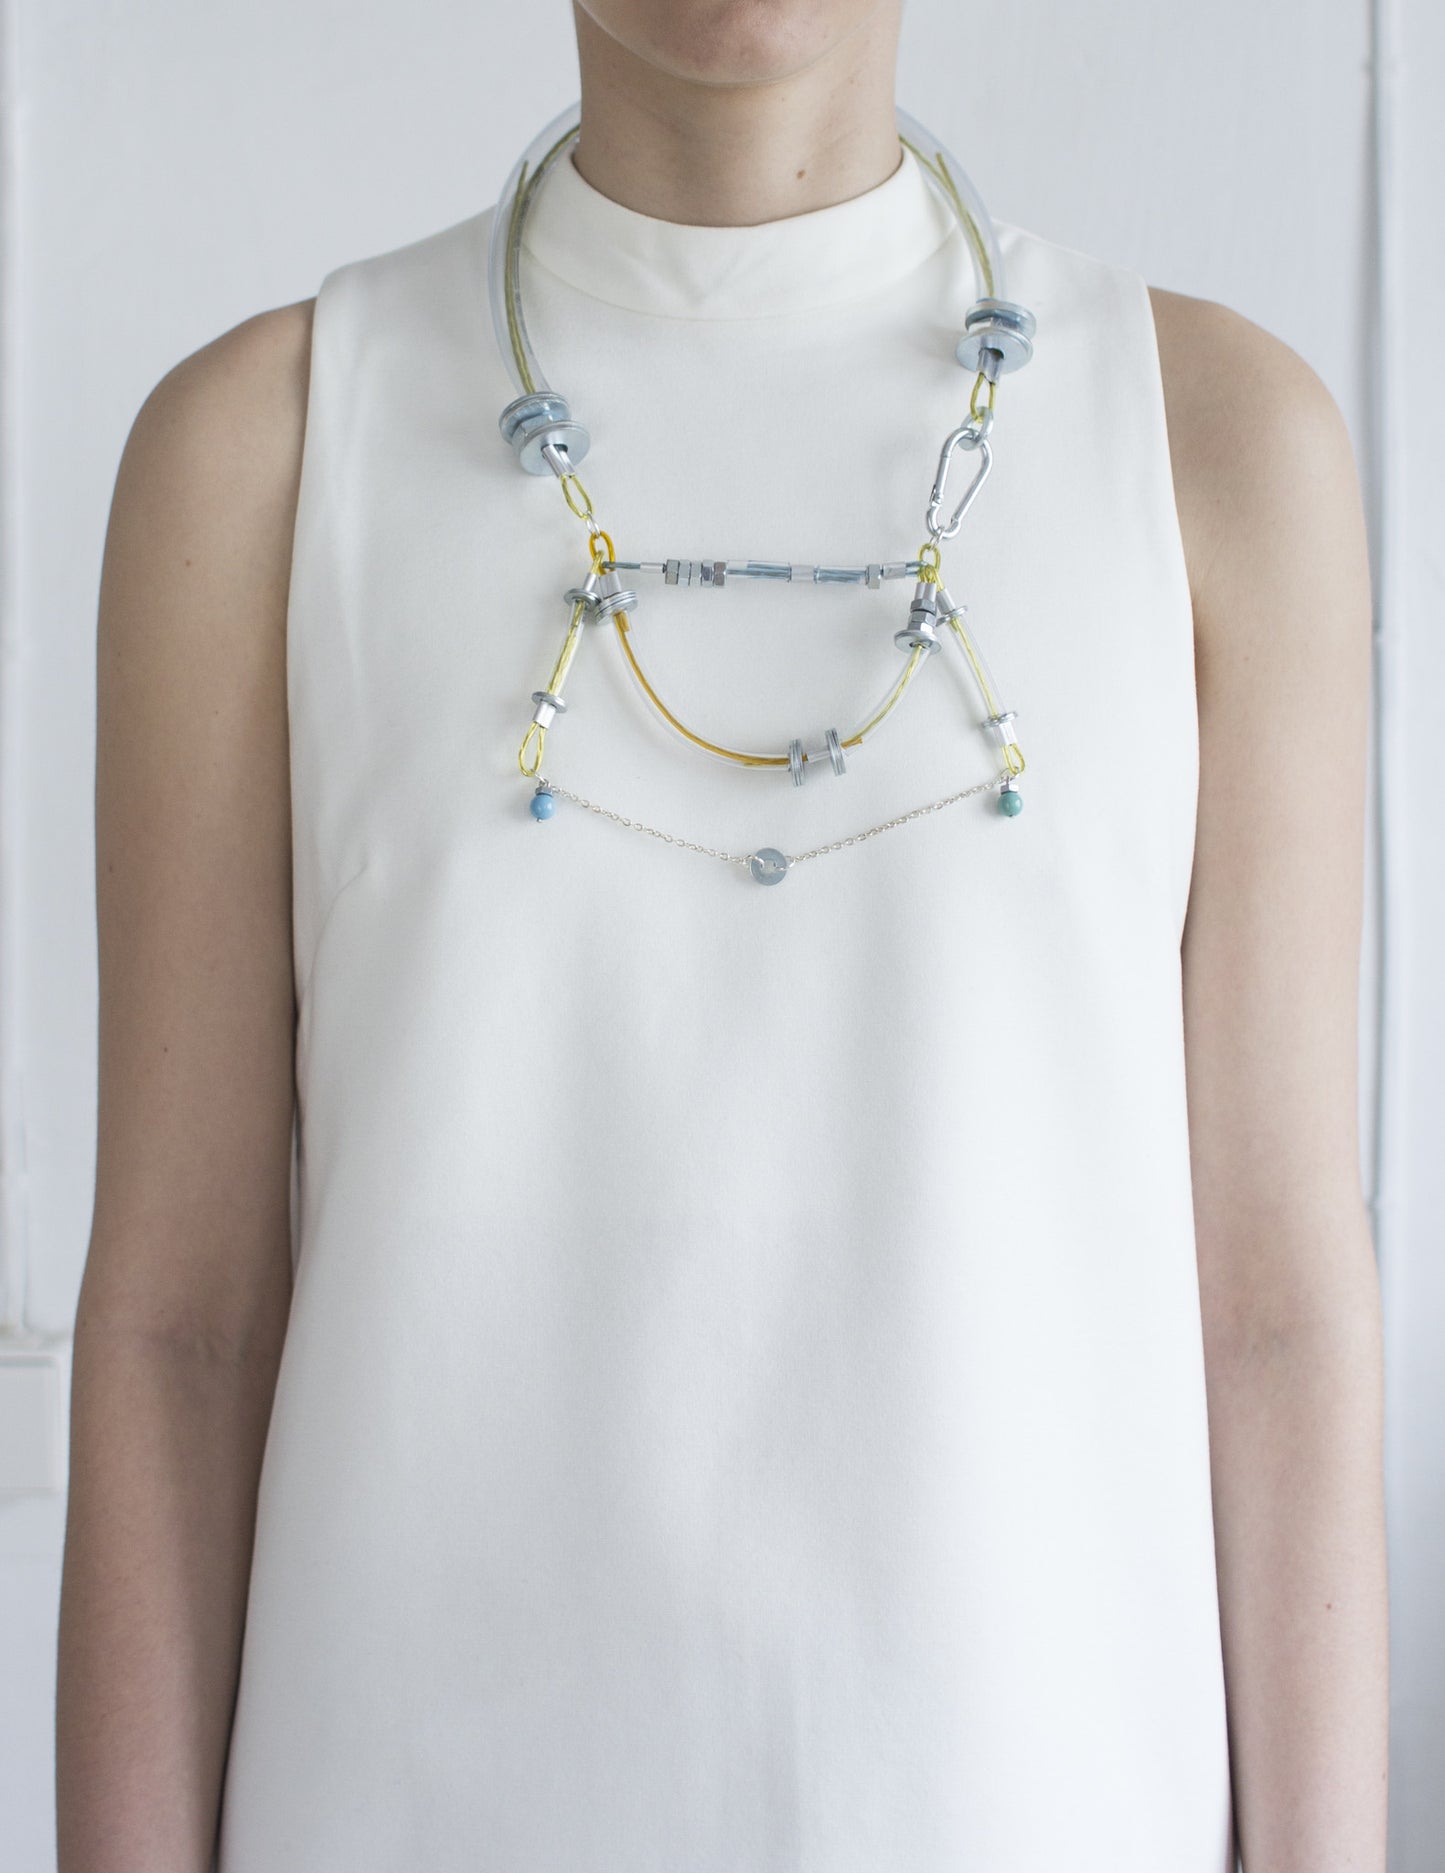 Industrial design necklace with metal details and swarovski pearls